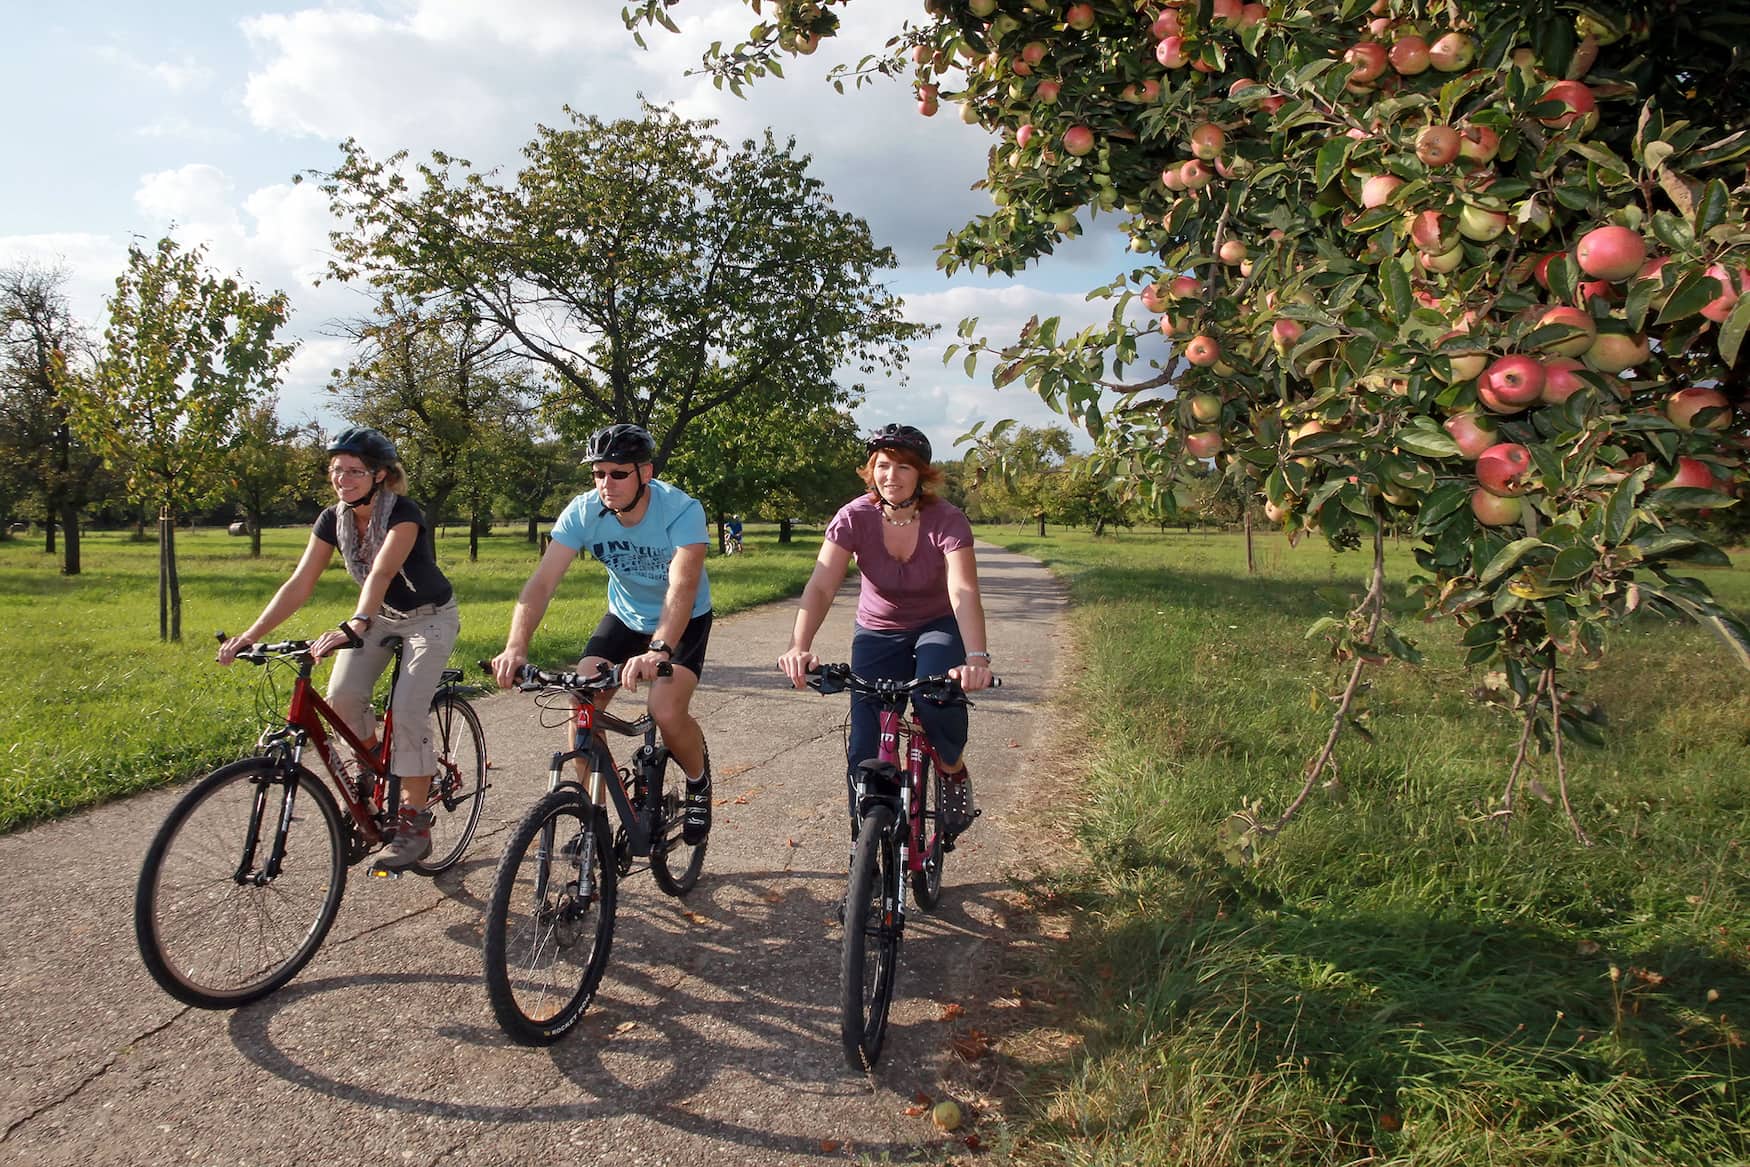 Bicycle tour along apple trees